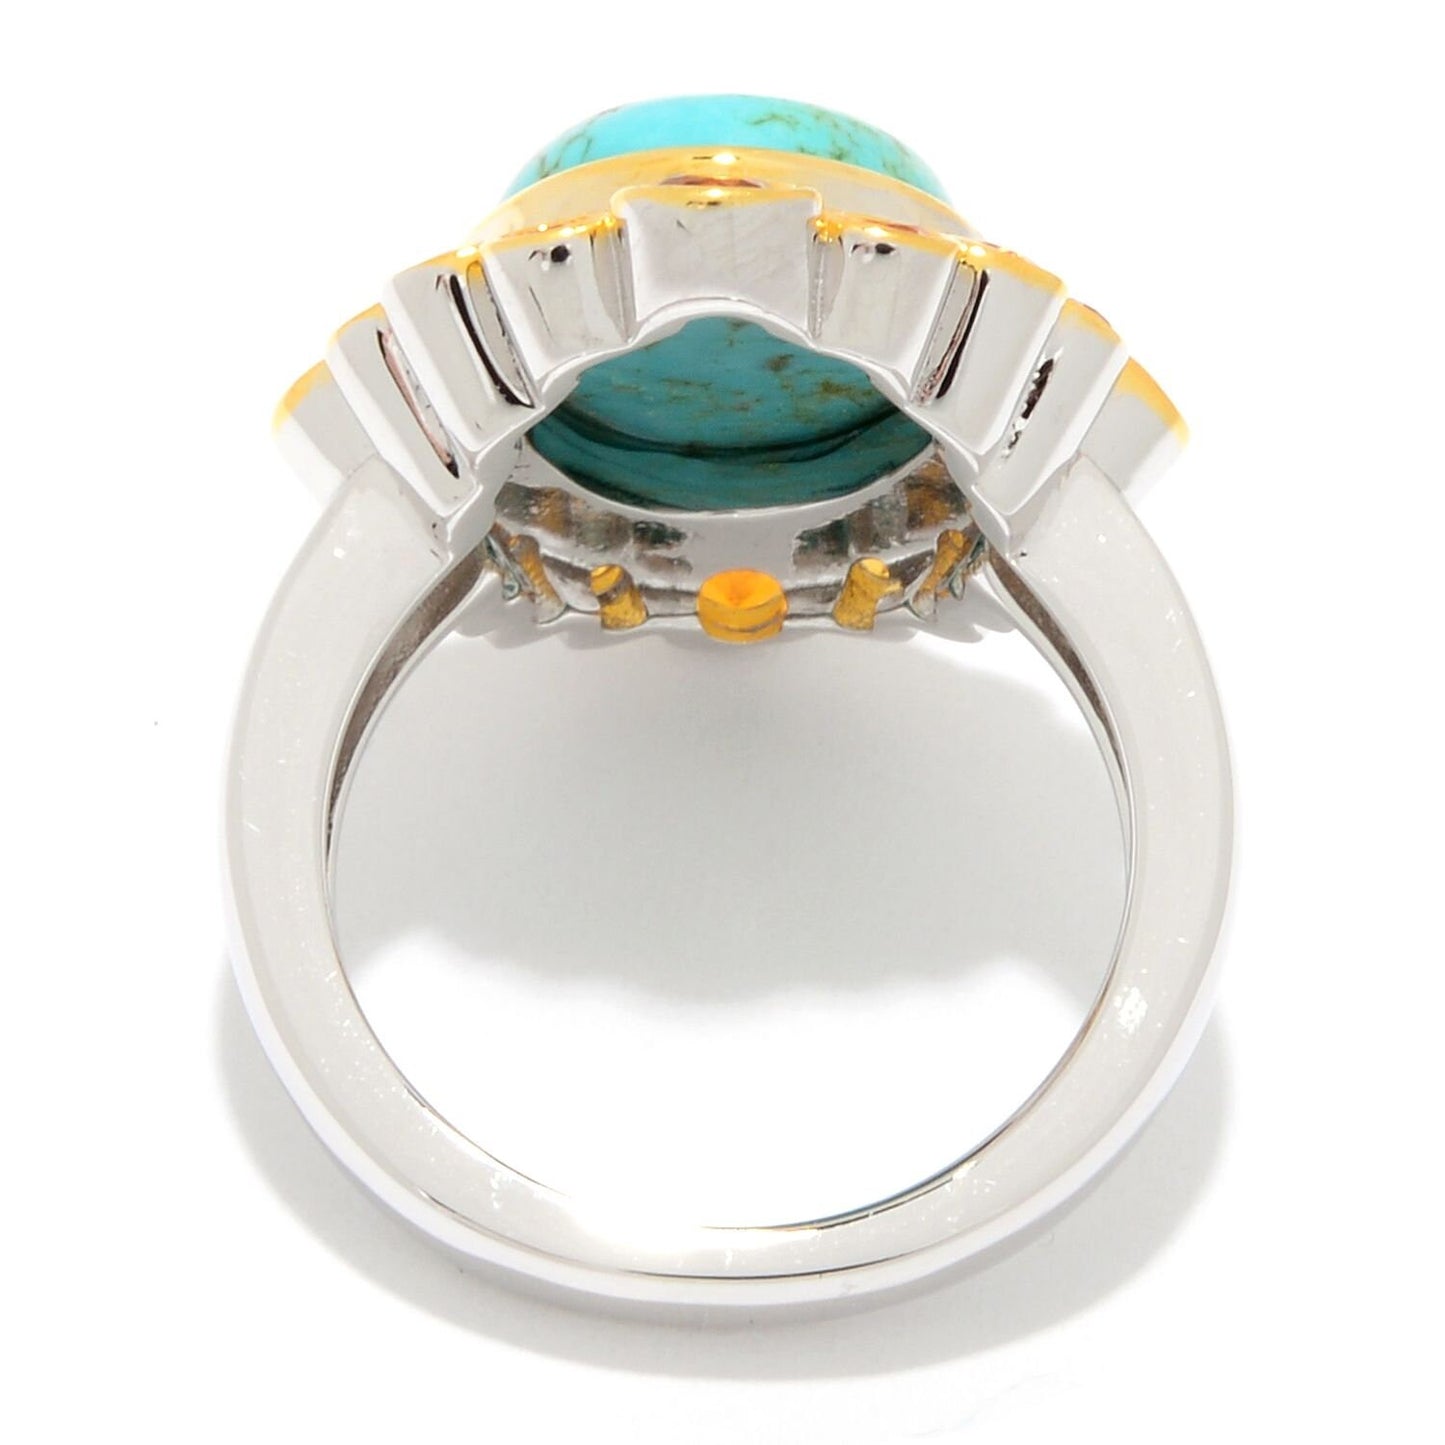 Mine#8 Turquoise With Madeira Citrine Ring,Sterling Silver Ring, Engagement Ring, Birthstone Ring-Gemstone Jewelry Anniversary Gift For Her